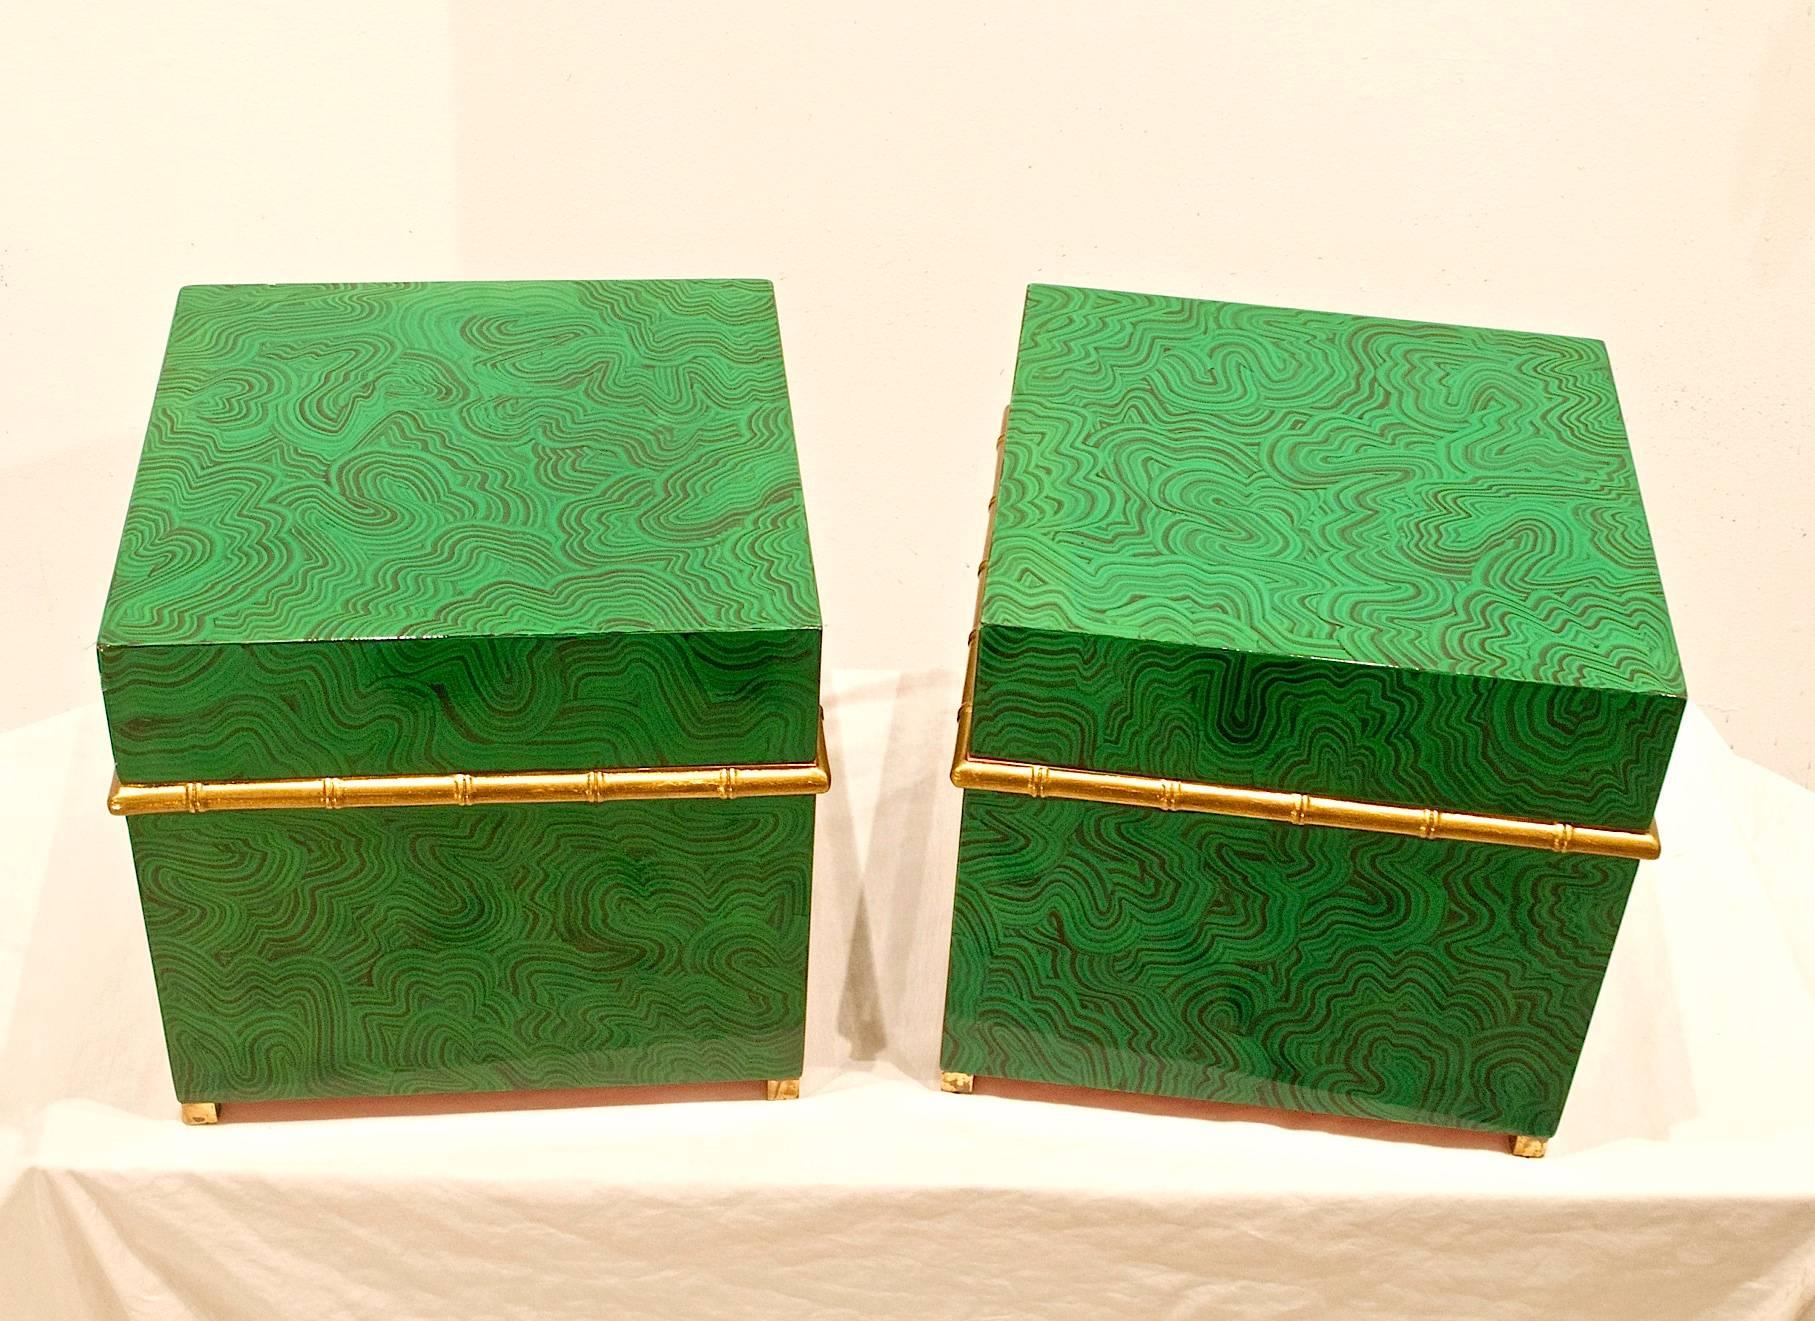 Pair of faux malachite boxes with style to spare. These hard to come by storage boxes can house your finery with panache'. Having faux bamboo trimmings and brass capped feet, these luxurious cubes can do wrong. Salmon lacquered interiors.